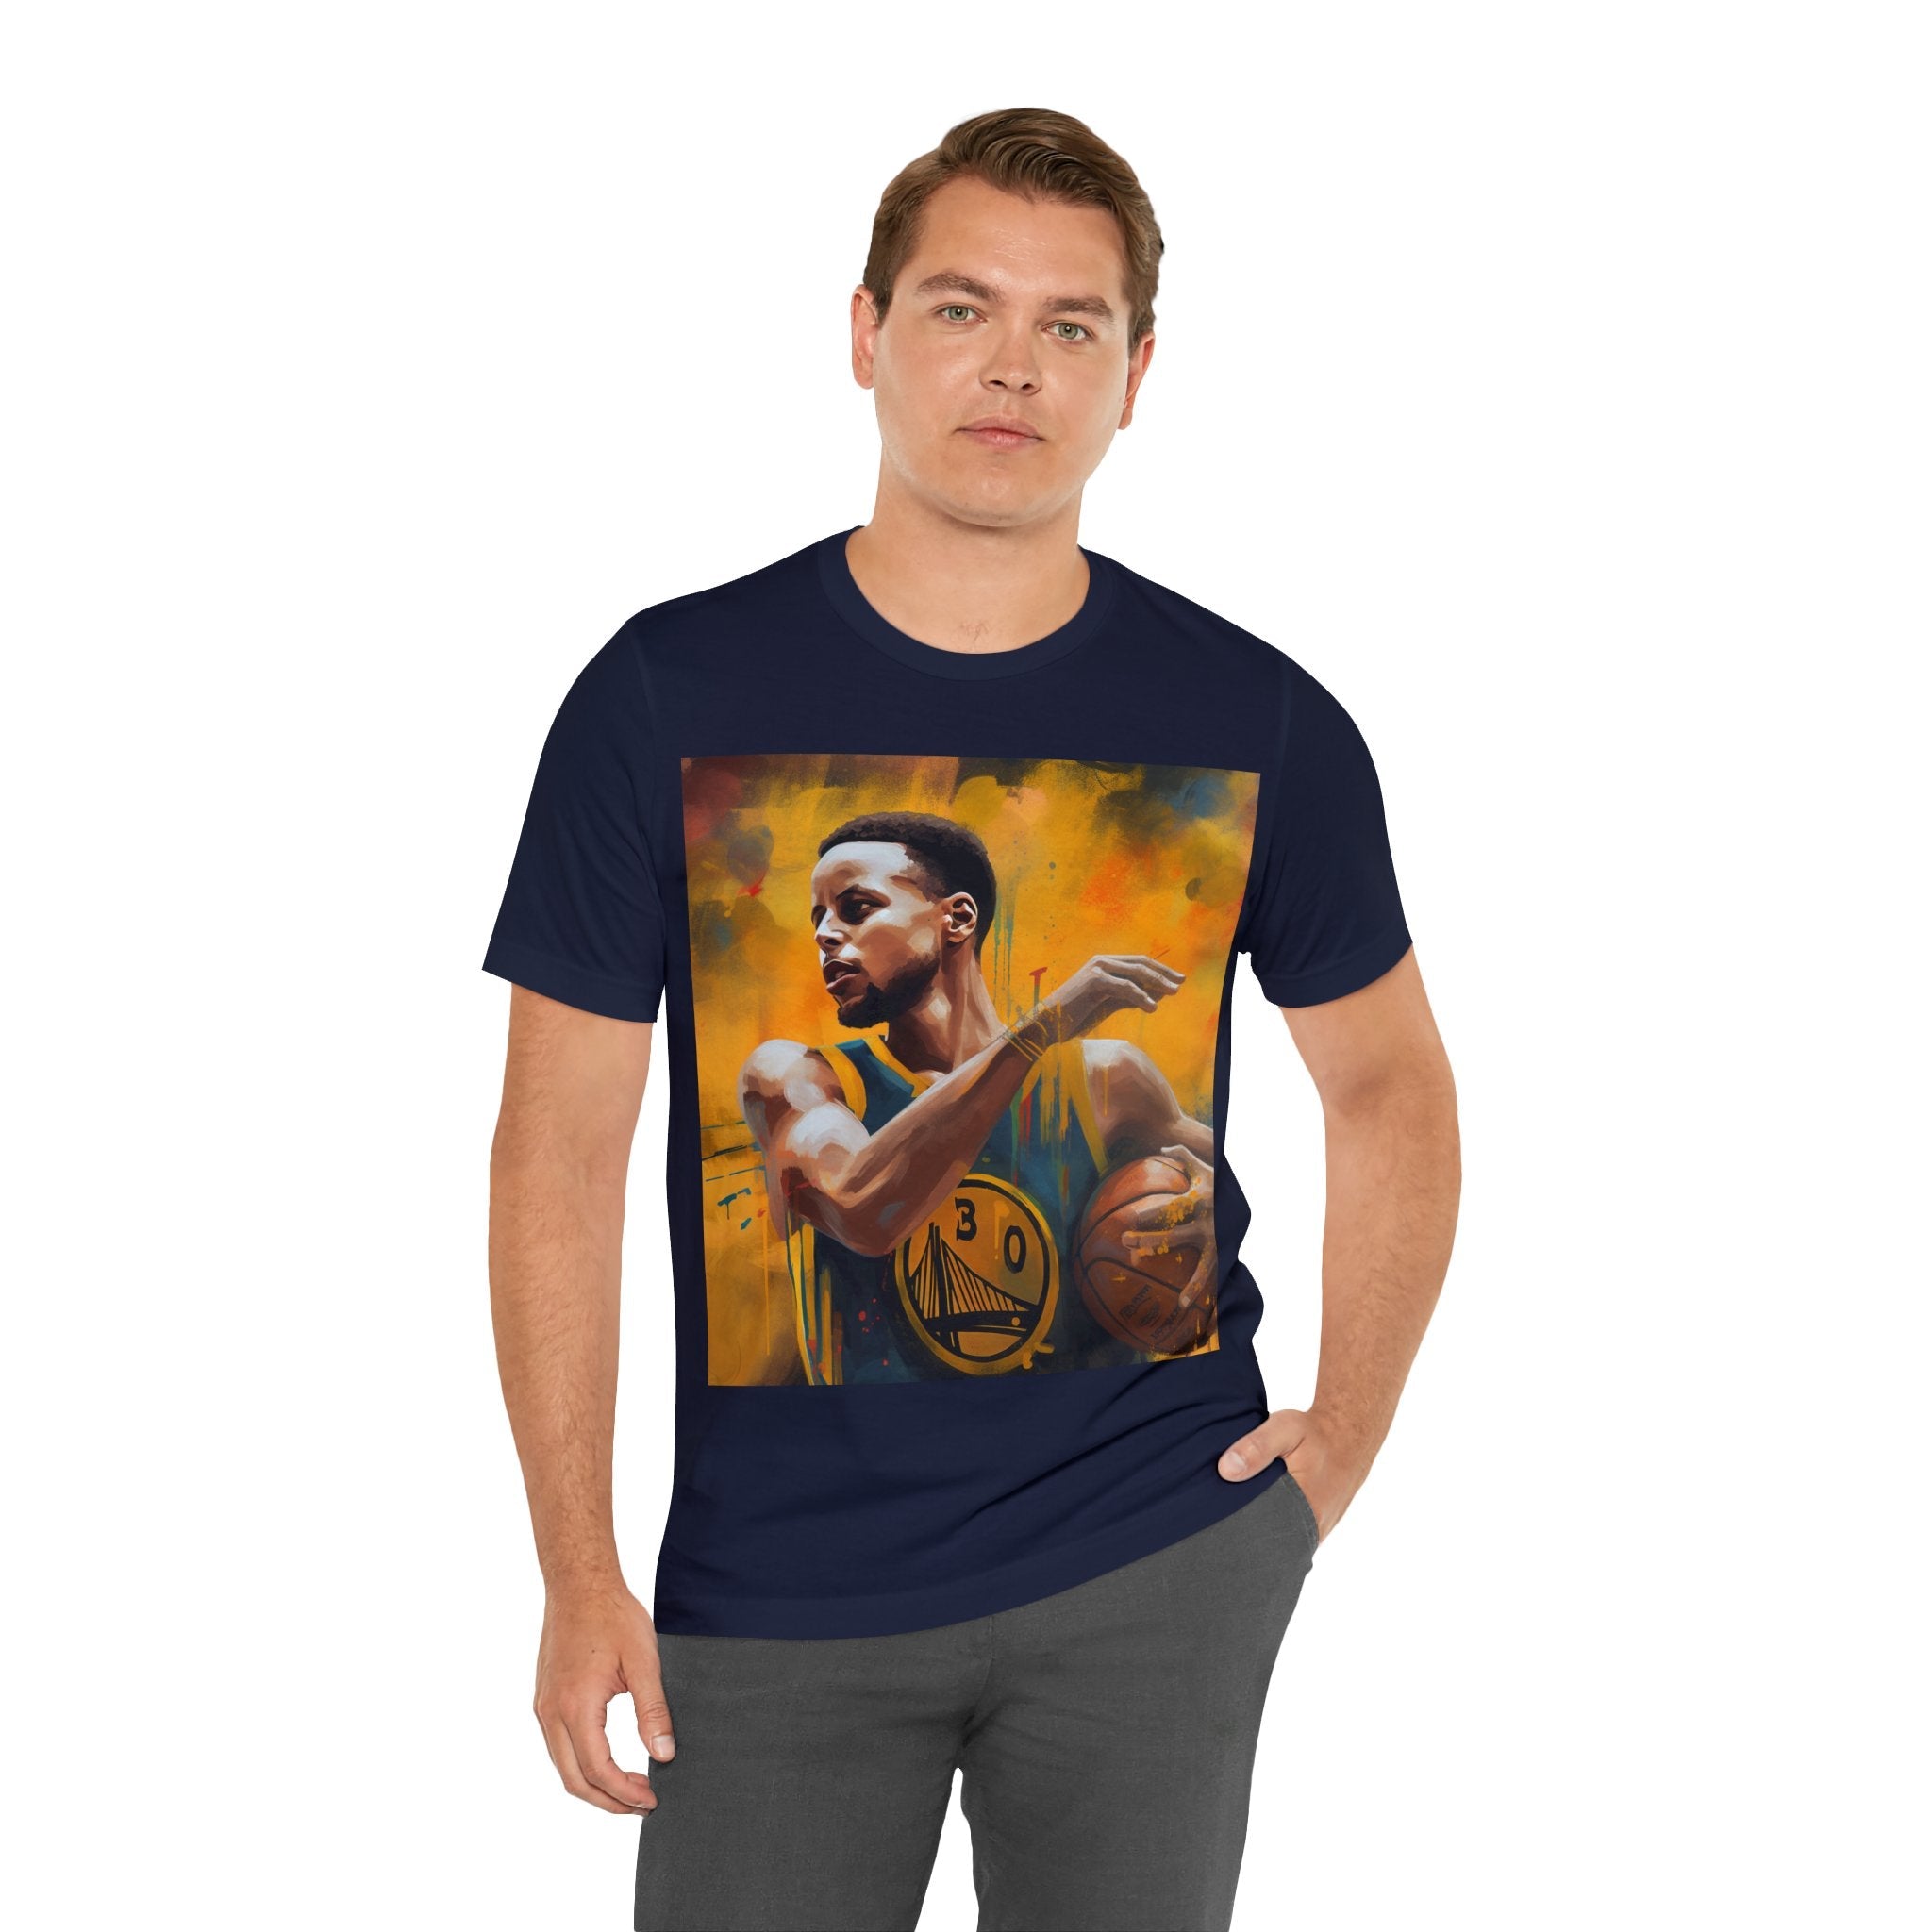 Support Your Warrior From the Golden State!  Wear to any Event! Dynamic Basketball Athlete 3-Point Shooter Unisex Jersey Tee - Premium Sports Fan Apparel for Sports Fans and Fans of Dynamic Players